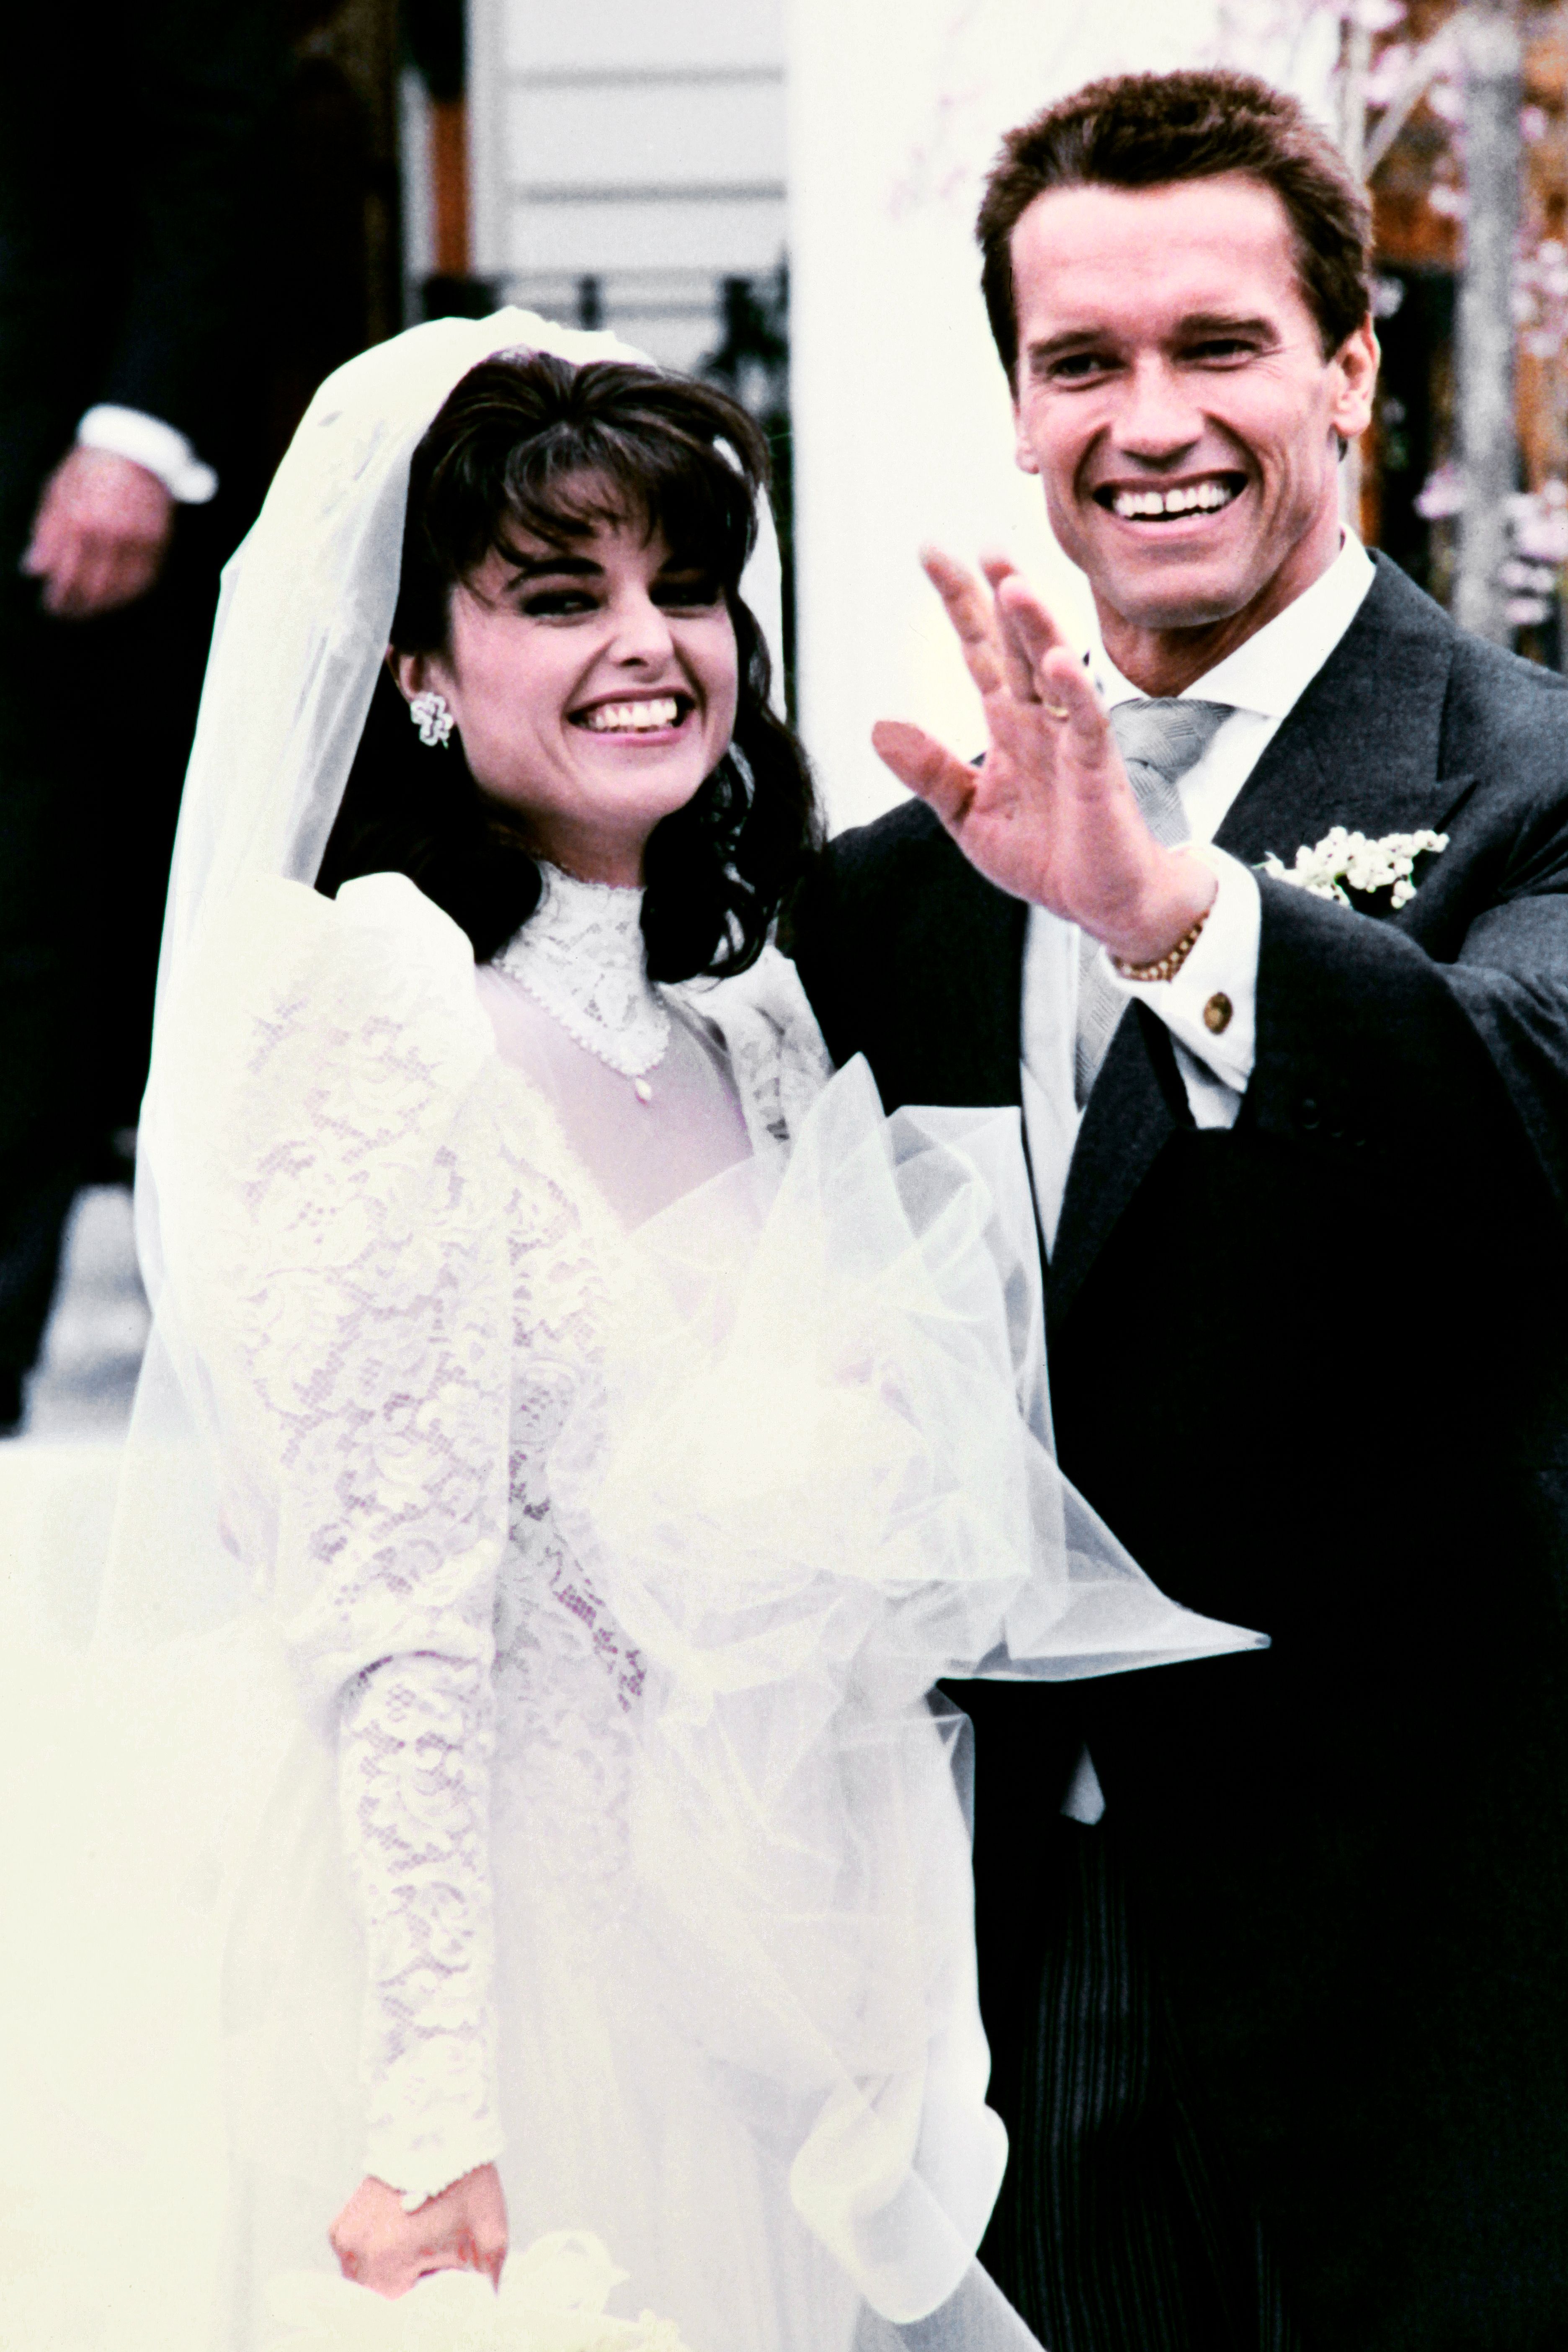 Arnold Schwarzenegger and Maria Shriver tie the knot in Massachusetts, USA, on April 26, 1986. | Source: Getty Images